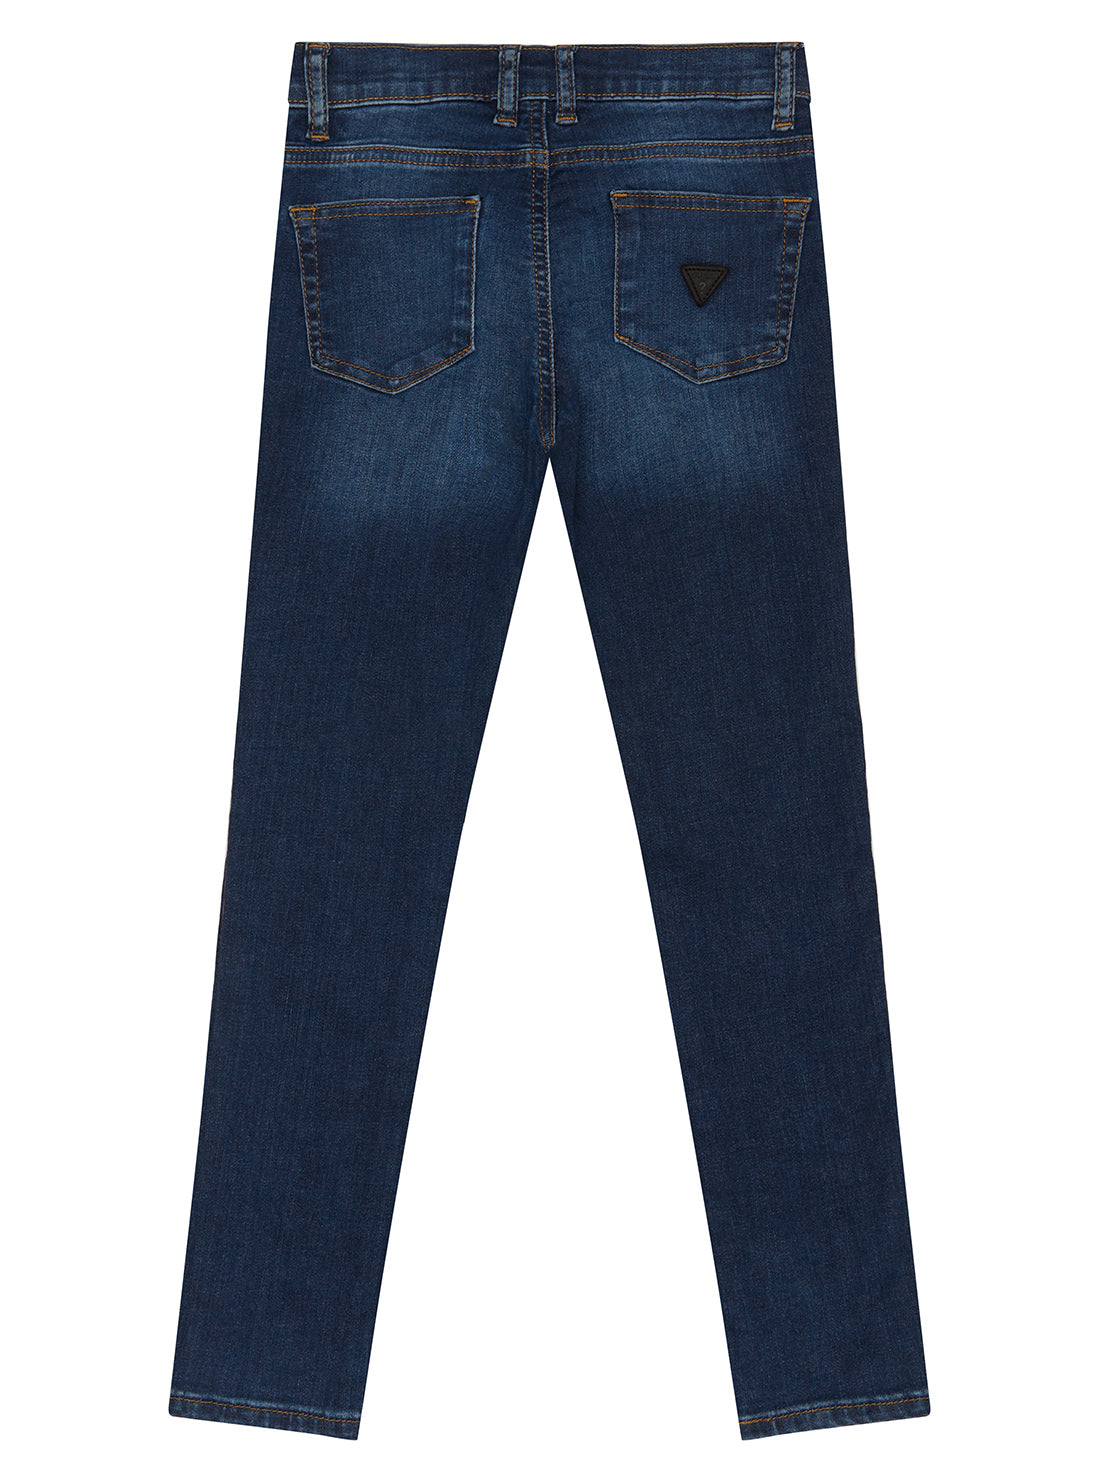 Think Positive Emby Denim Skinny Jeans | GUESS Kids | back view